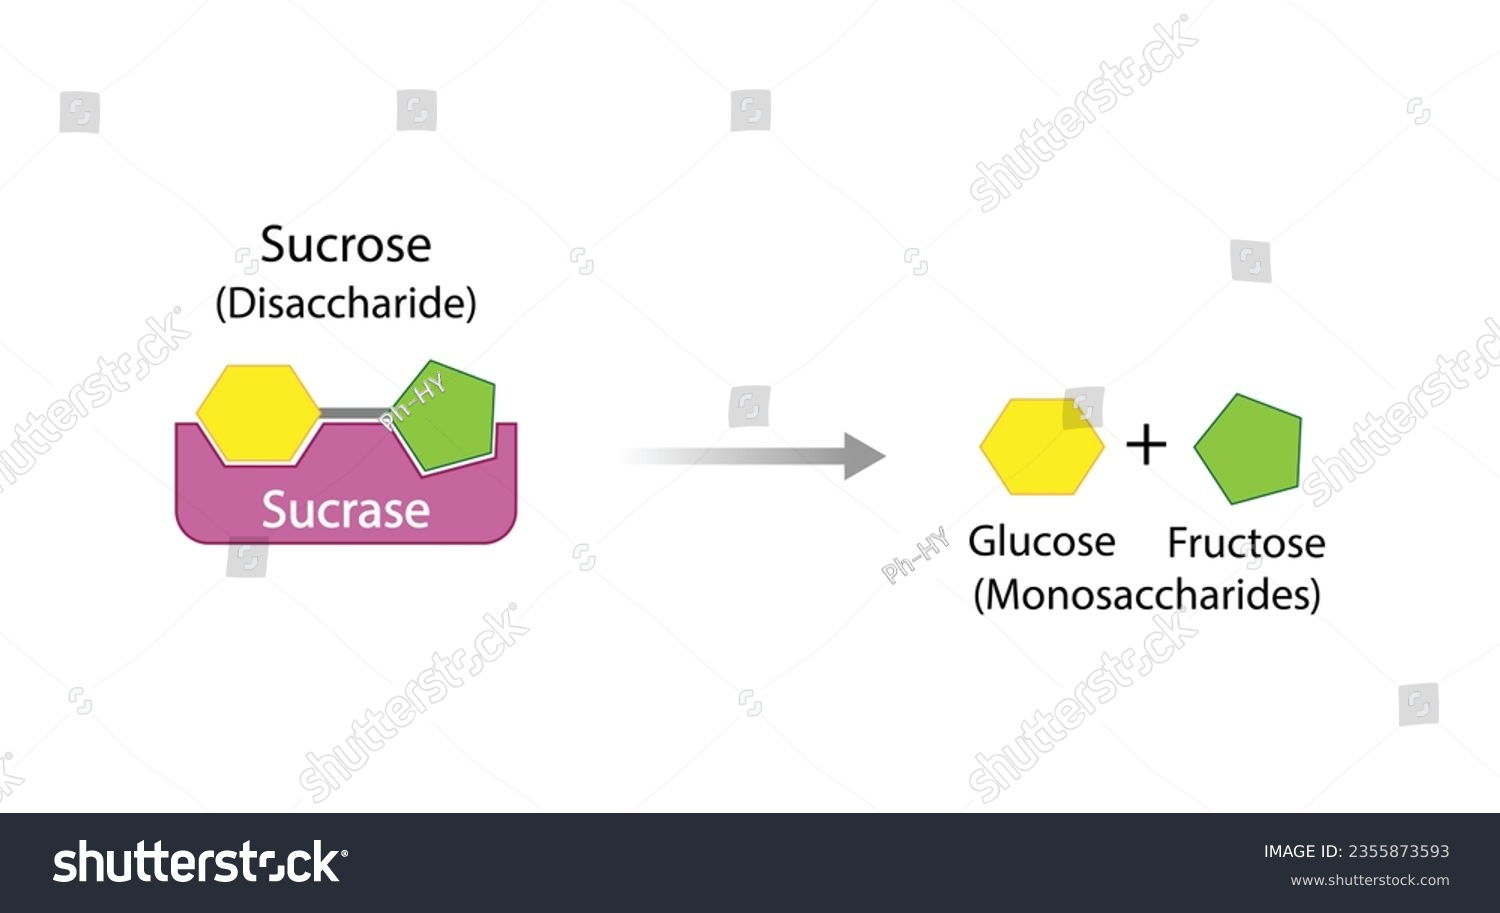 SVG of Sucrose digestion. Carbohydrates Digestion. Sucrase Enzymes catalyze Disaccharide sucrose Molecule to glucose and fructose. Glucose Sugar Formation. Scientific Diagram. Vector Illustration. svg